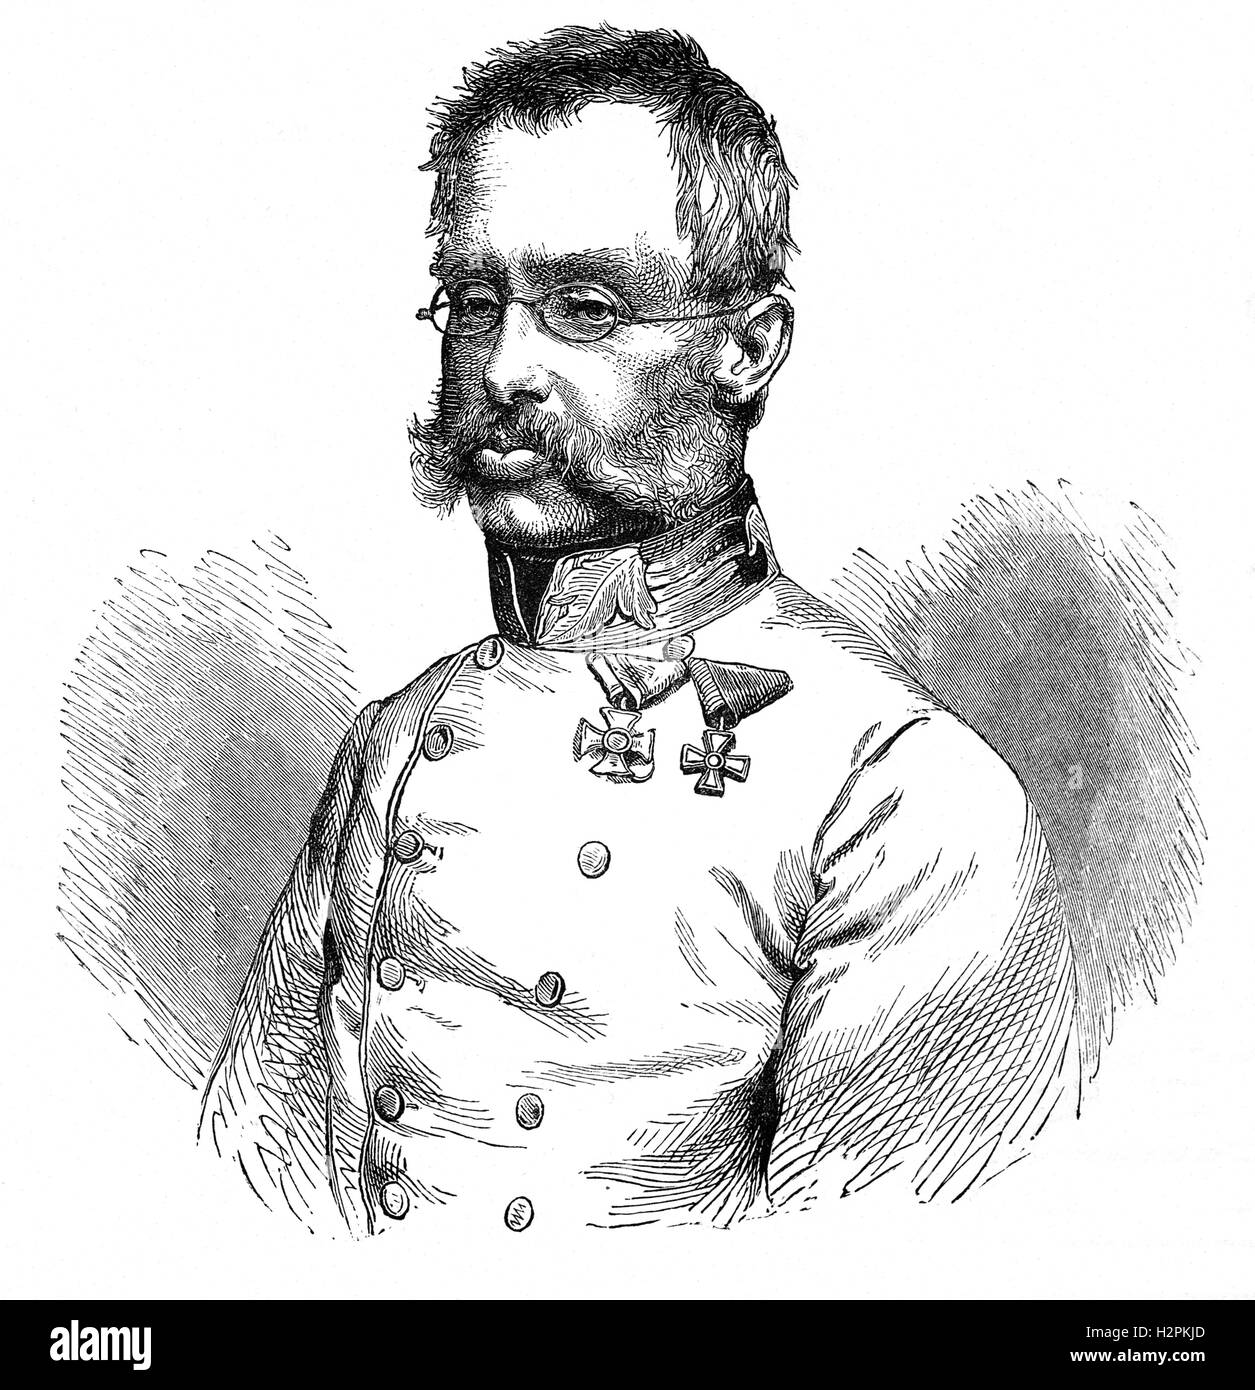 Archduke Albrecht Friedrich Rudolf Dominik of Austria,(1817 – 1895) was an Austrian Habsburg general.  At the outbreak of the Seven Weeks' War in June 1866, Albrecht was named commander of the southern army facing the Italian forces of King Victor Emmanuel II. Albrecht was decisively victorious in the battle of Custoza (24 June 1866), but failed to exploit his victory when he neglected to pursue the beaten Italian Army of the Mincio. Stock Photo